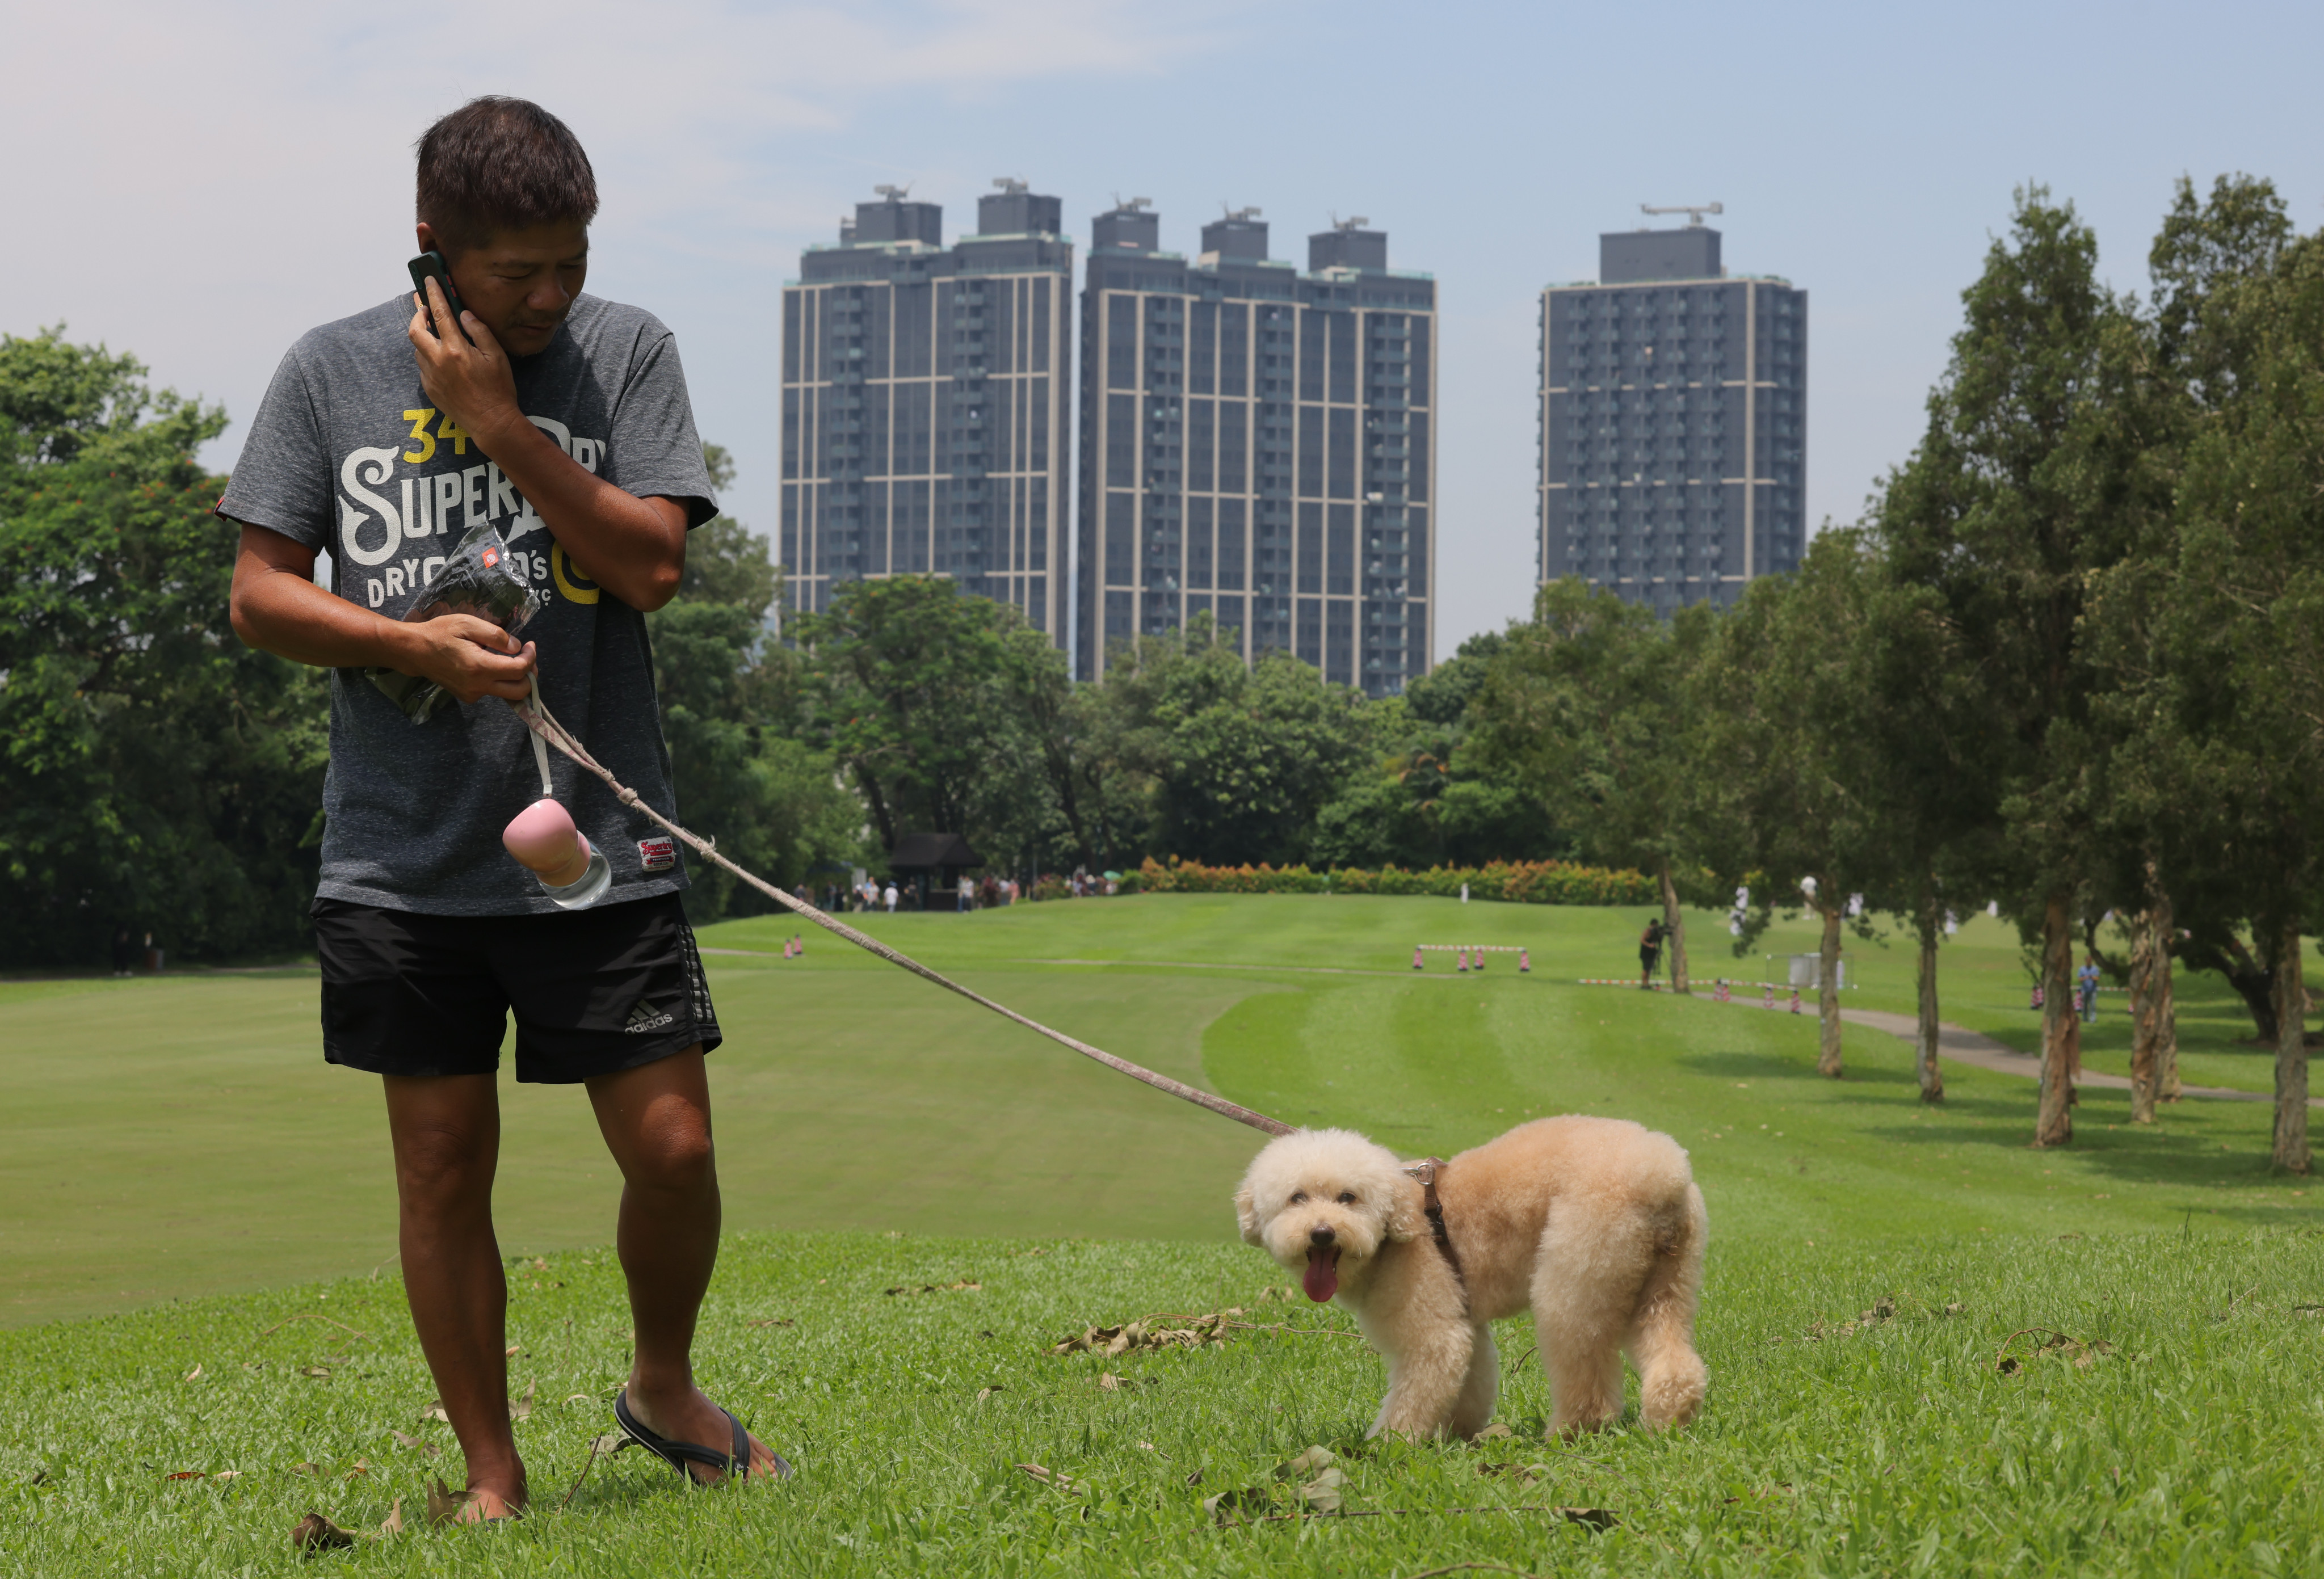 Dogwalkers were among the first visitors to a public park located on a section of a golf course taken back by authorities. Photo: Jelly Tse